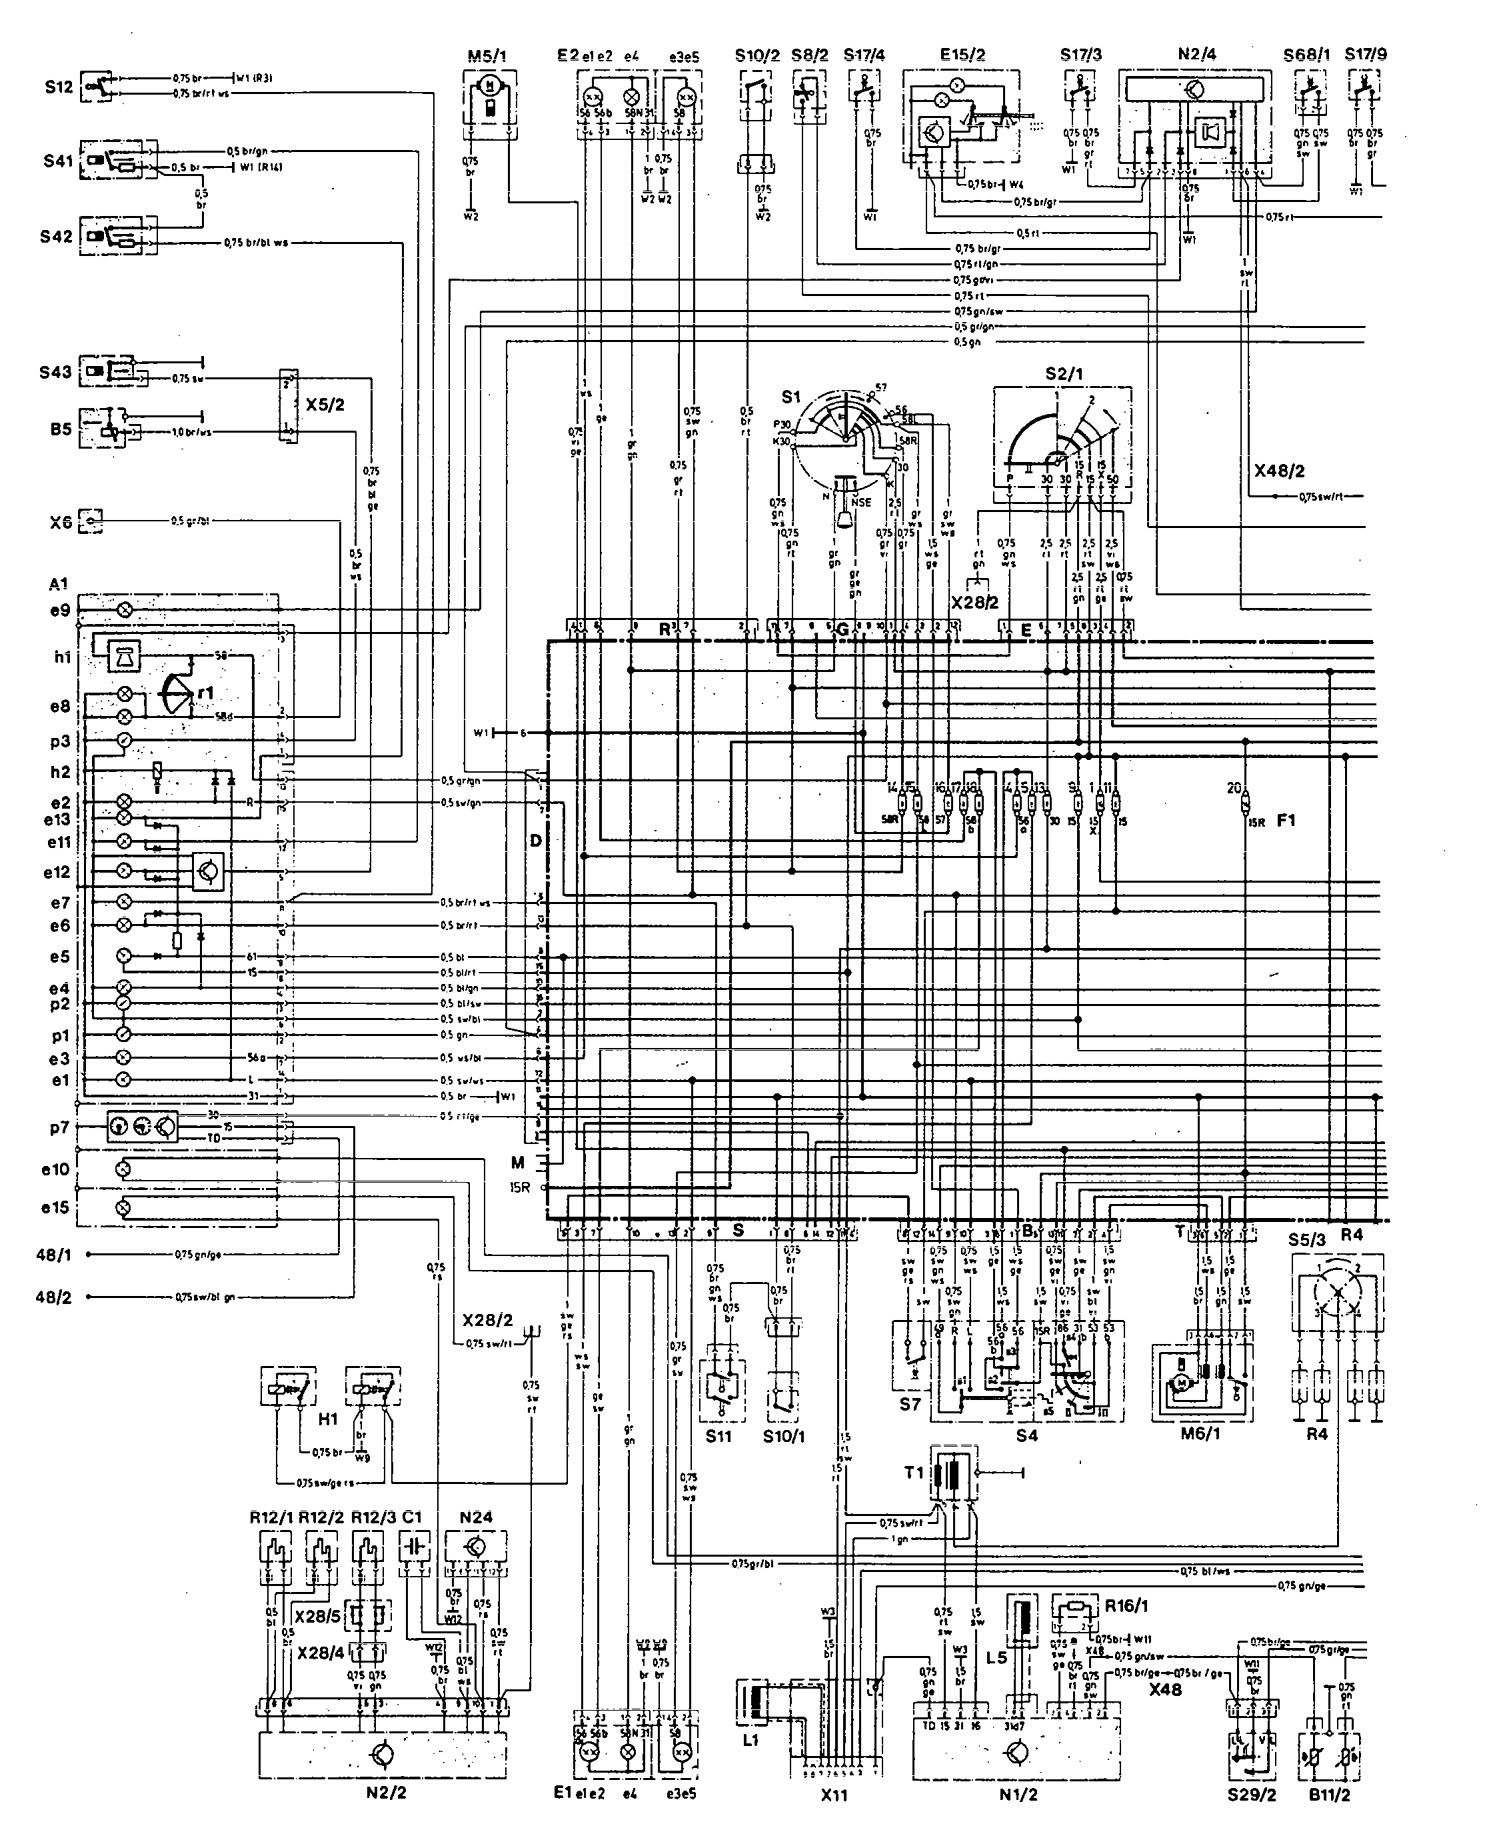 Mercedes Benz 300 Coupe Wiring Diagram from www.carknowledge.info